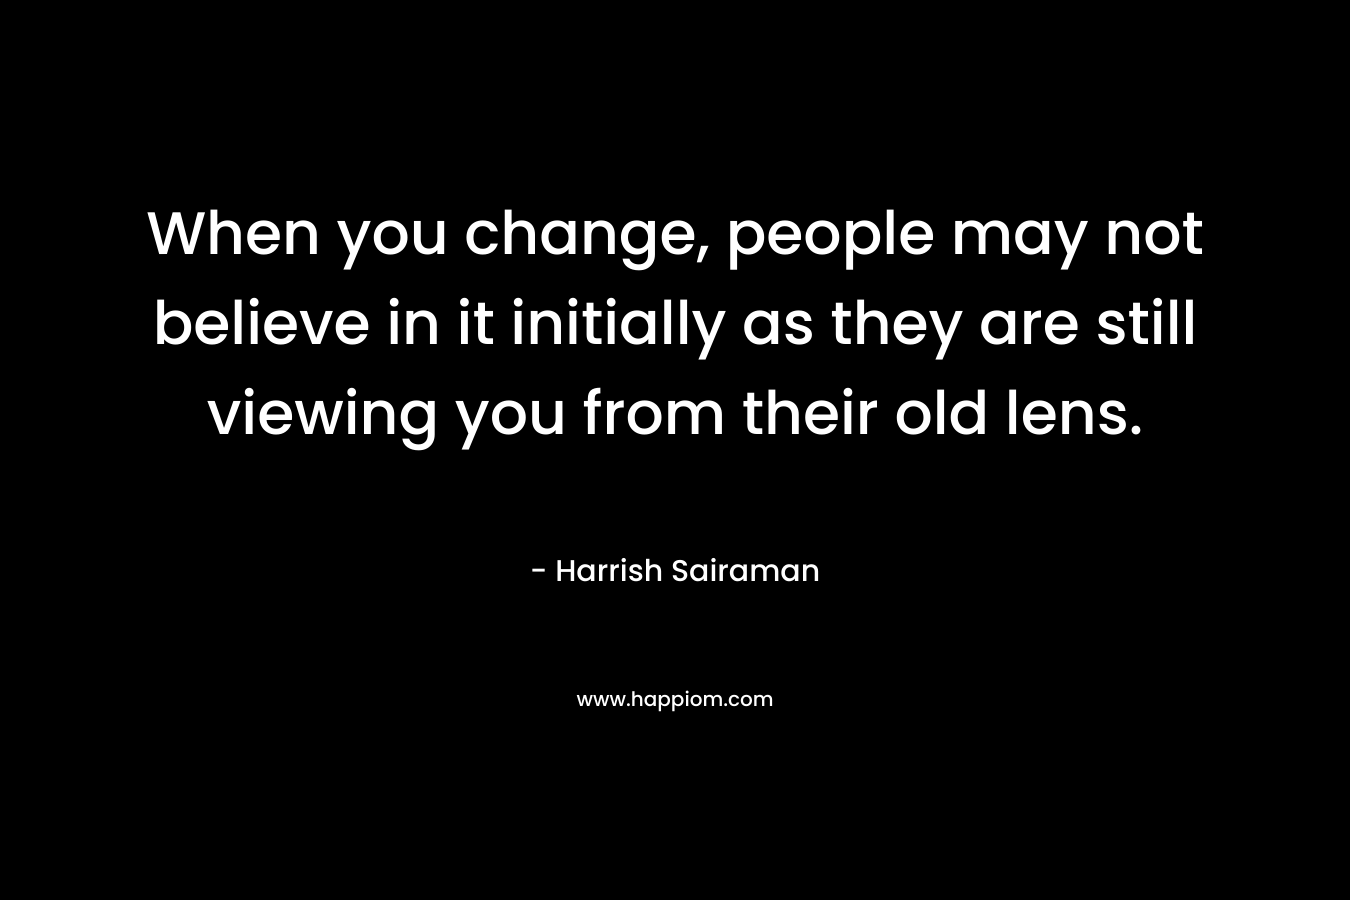 When you change, people may not believe in it initially as they are still viewing you from their old lens.